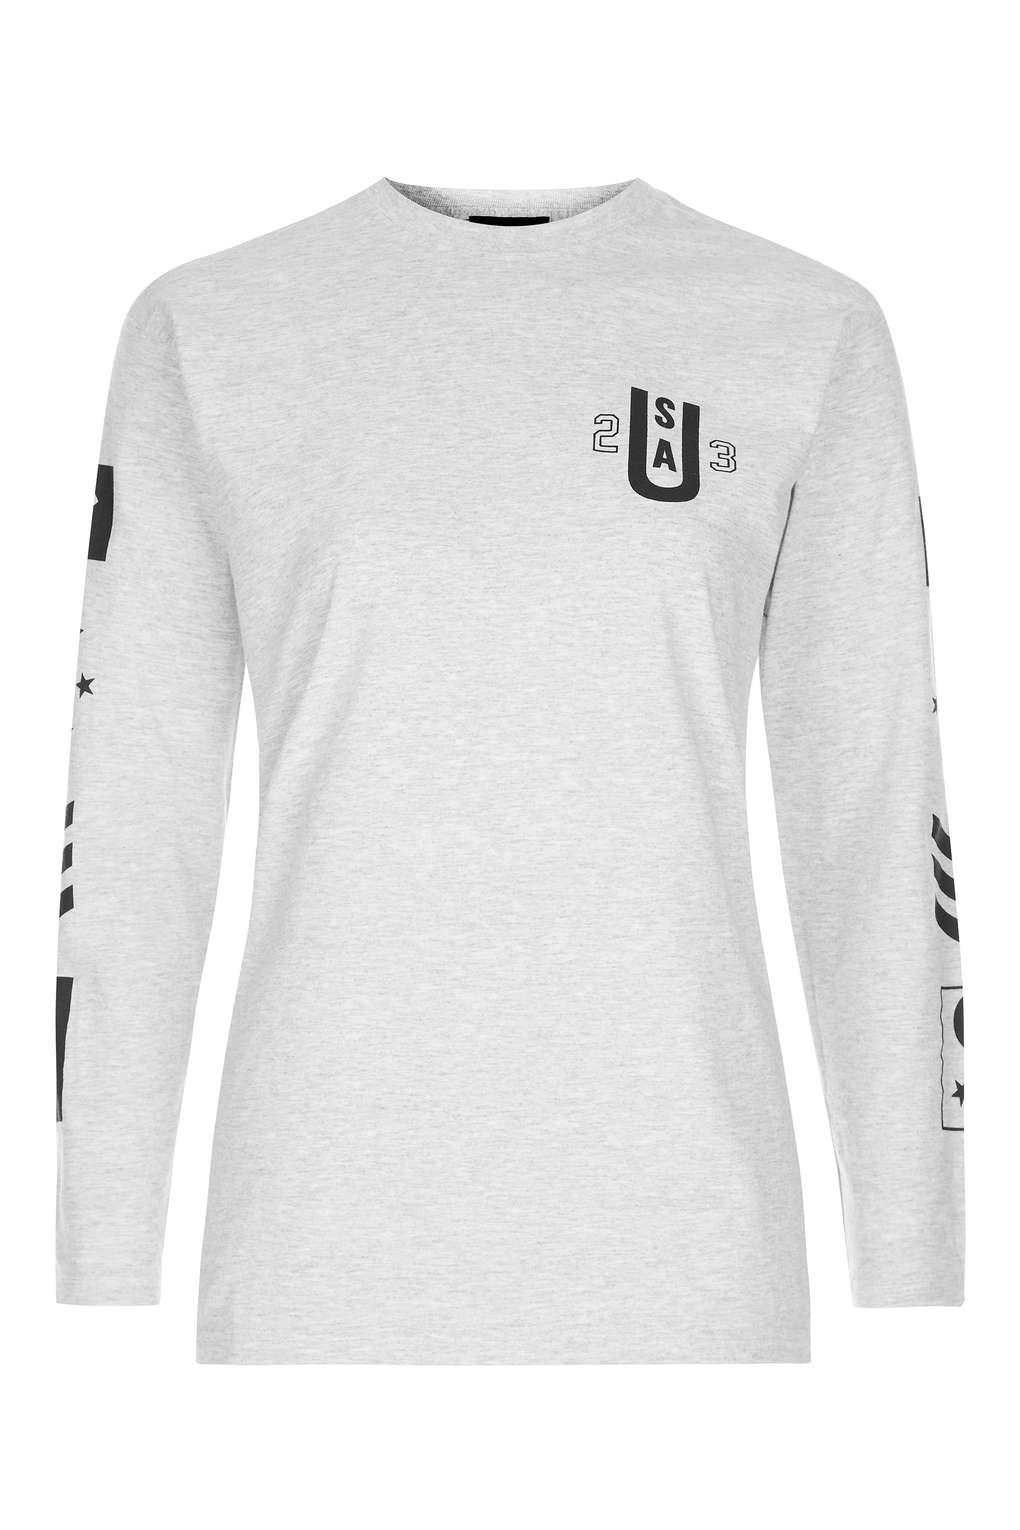 Download Lyst - TOPSHOP Long Sleeve Arm Graphic T-shirt in Gray